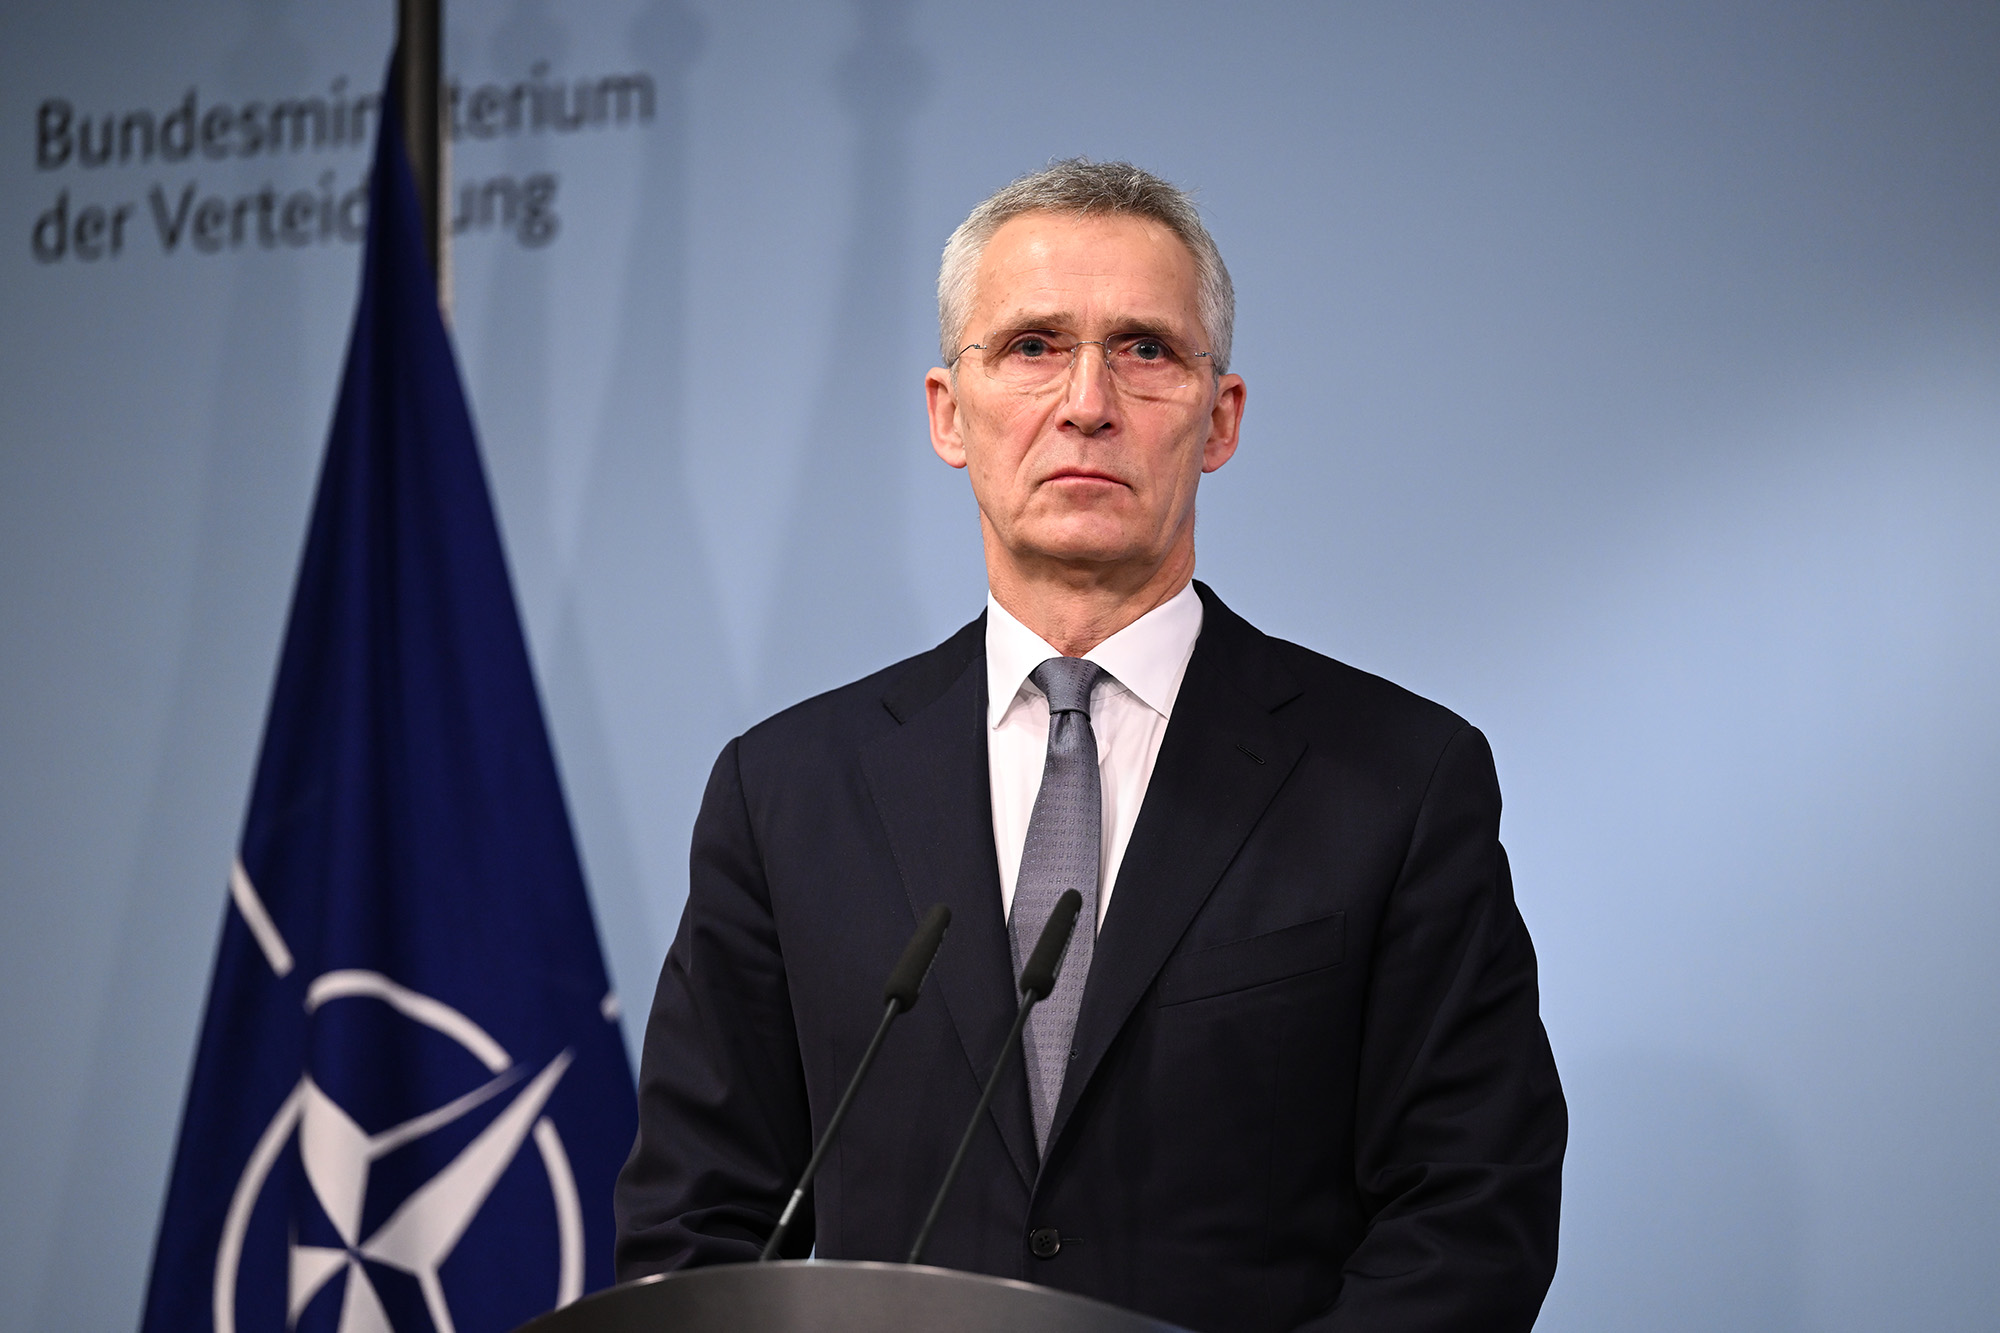 NATO Secretary General Jens Stoltenberg attends a joint press conference at the Defense Ministry in Berlin, Germany, on January 24.